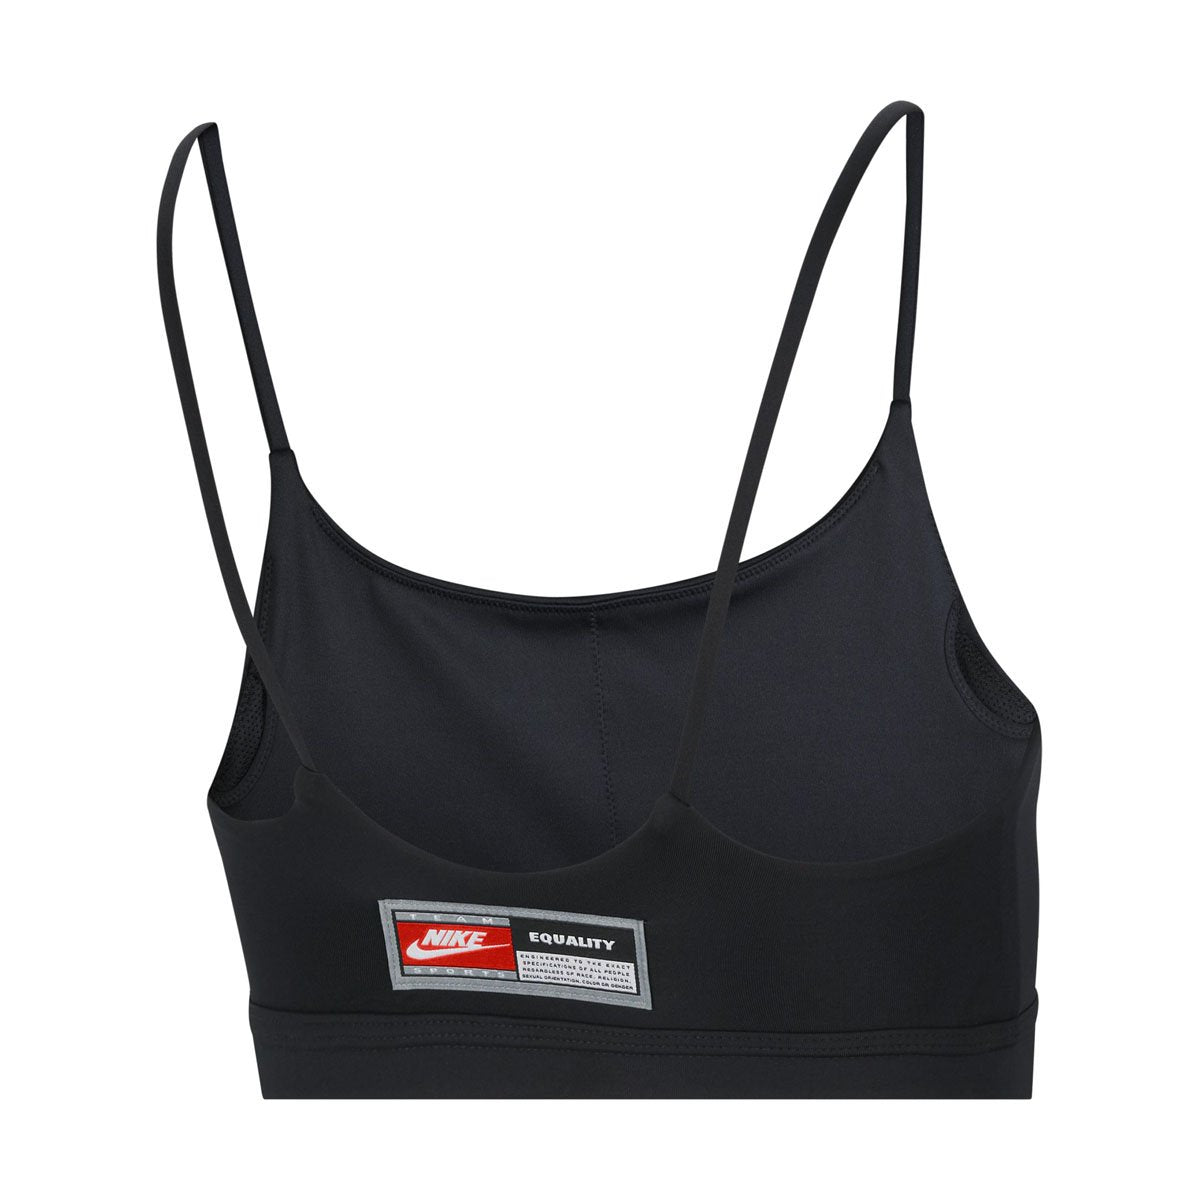 Nike Indy Light-Support Padded Longline Sports Bra Black Your